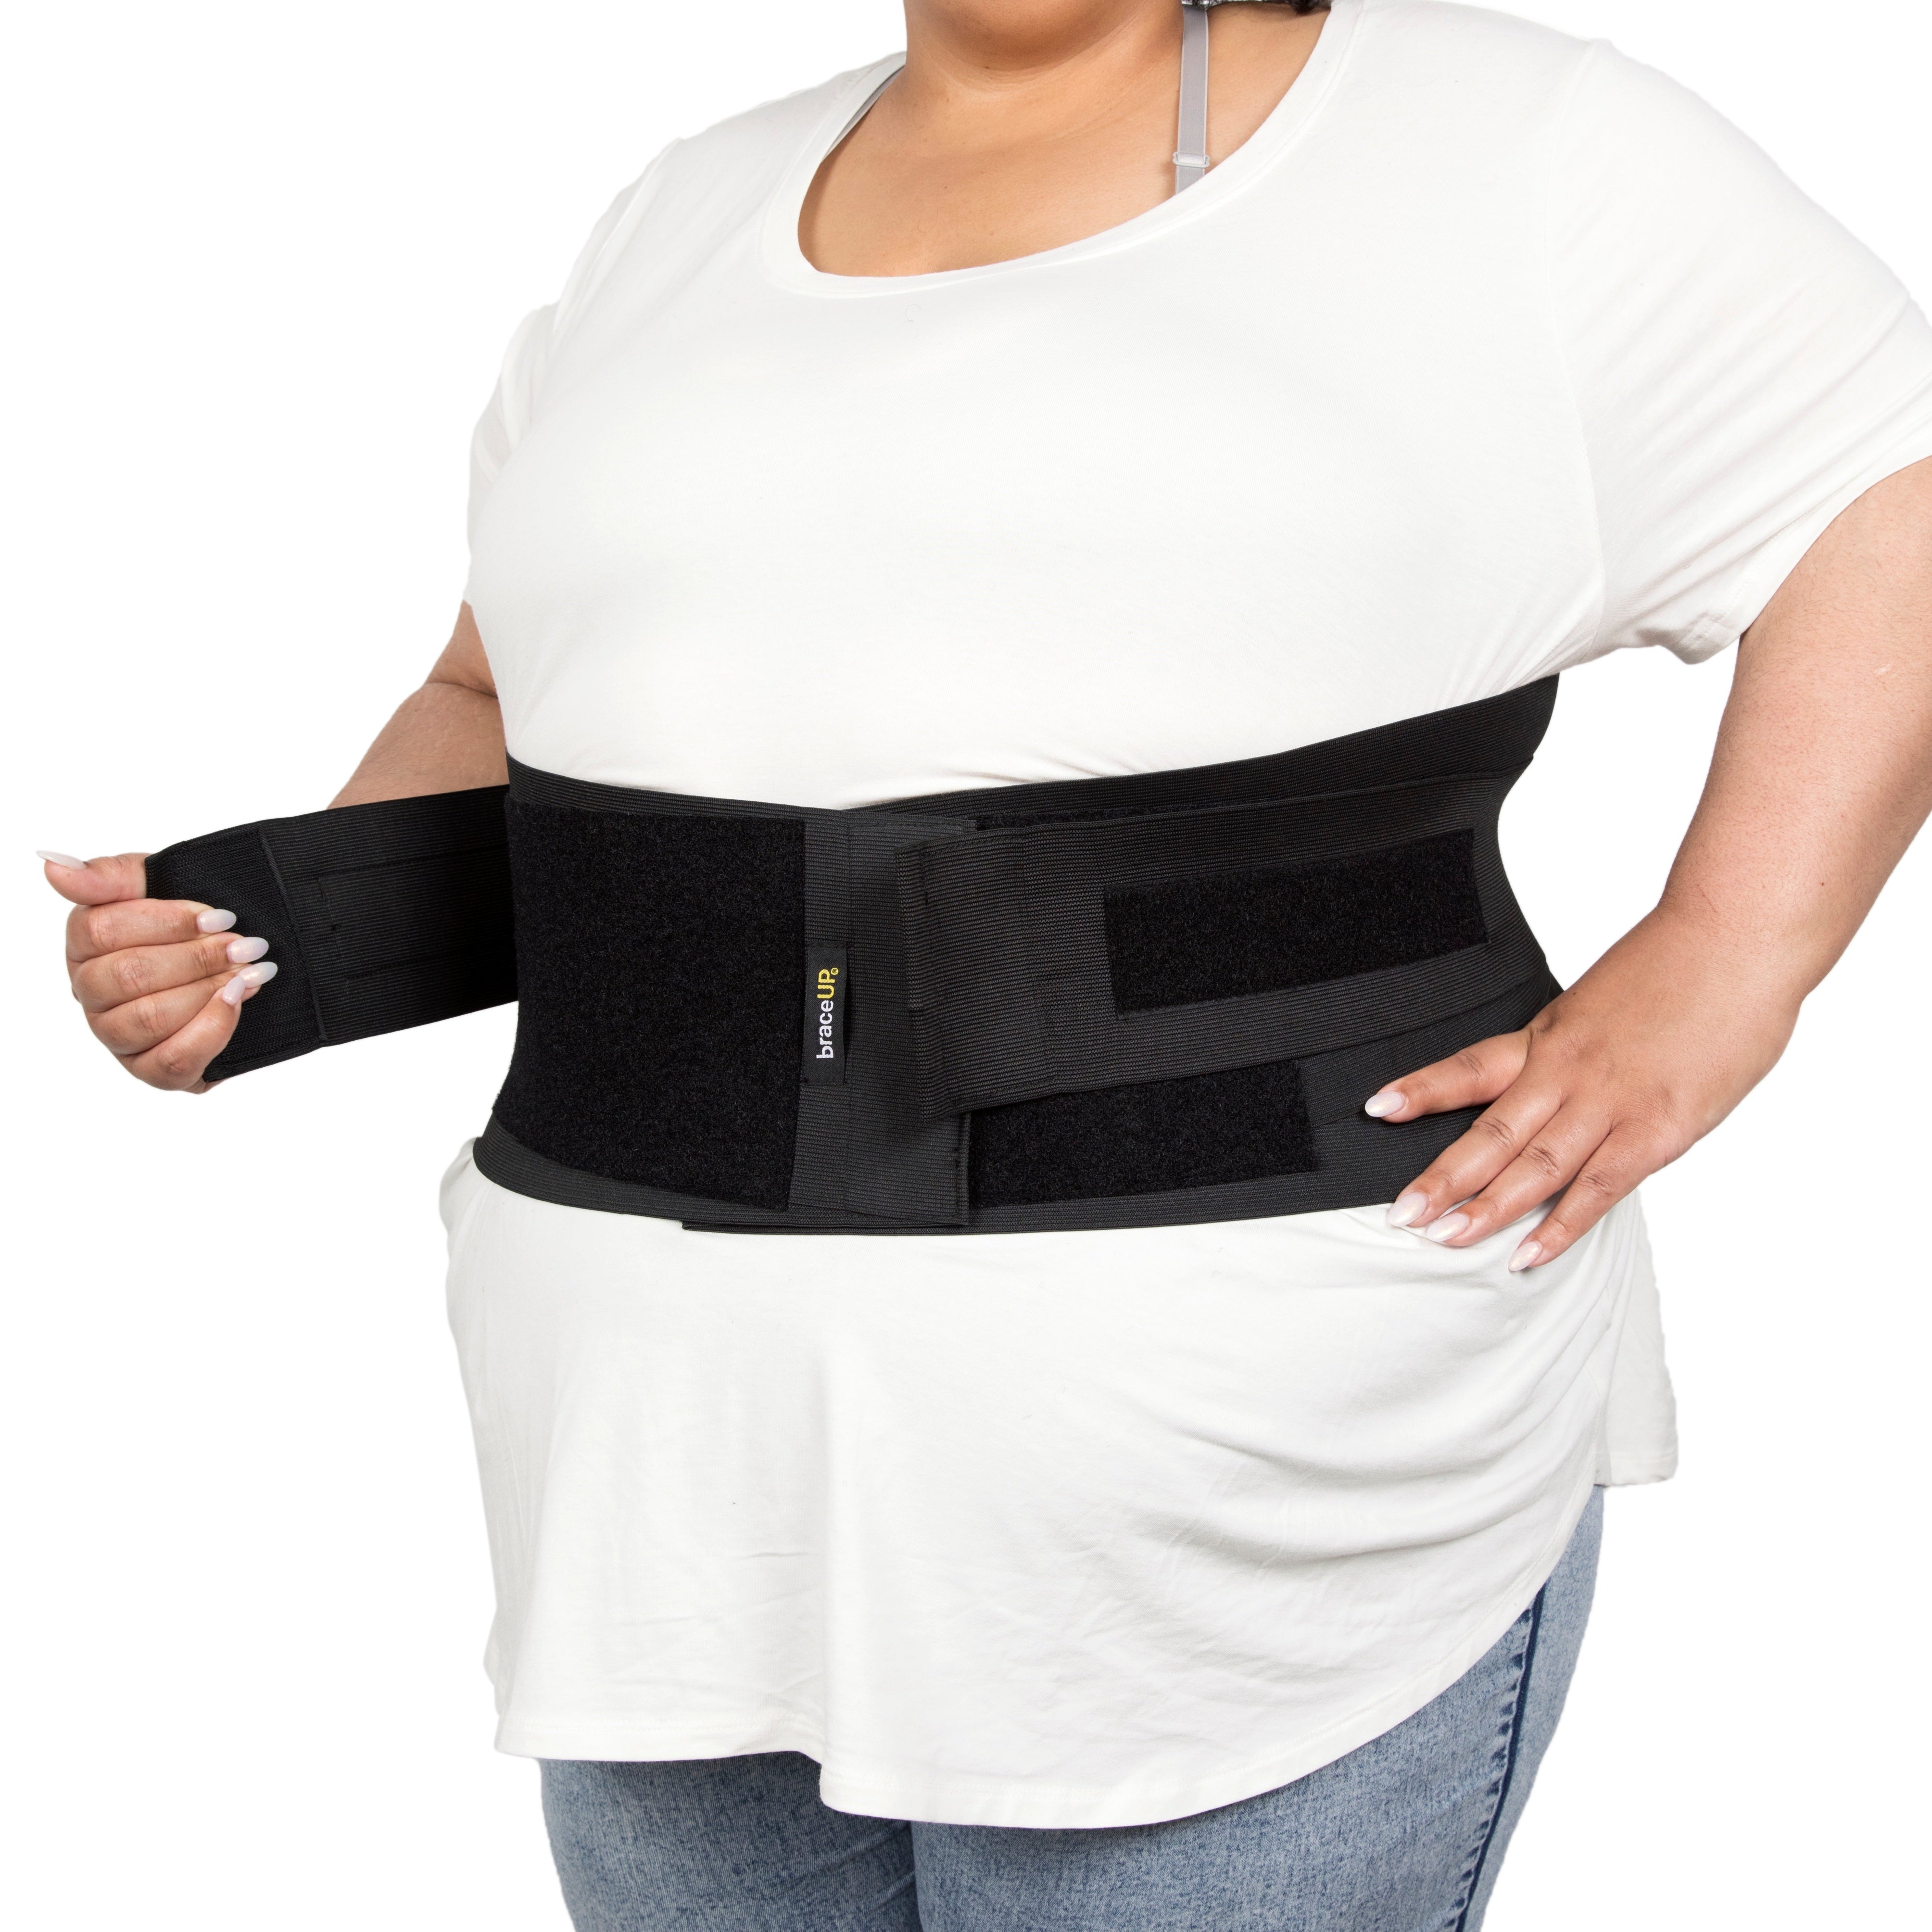 Plus Size 4XL/5XL Back Brace with Inflatable Lumbar Pad - Extra Support  More Effectively Relieve Lower Back Pain - Lumbar Support Belt for Big,  Tall